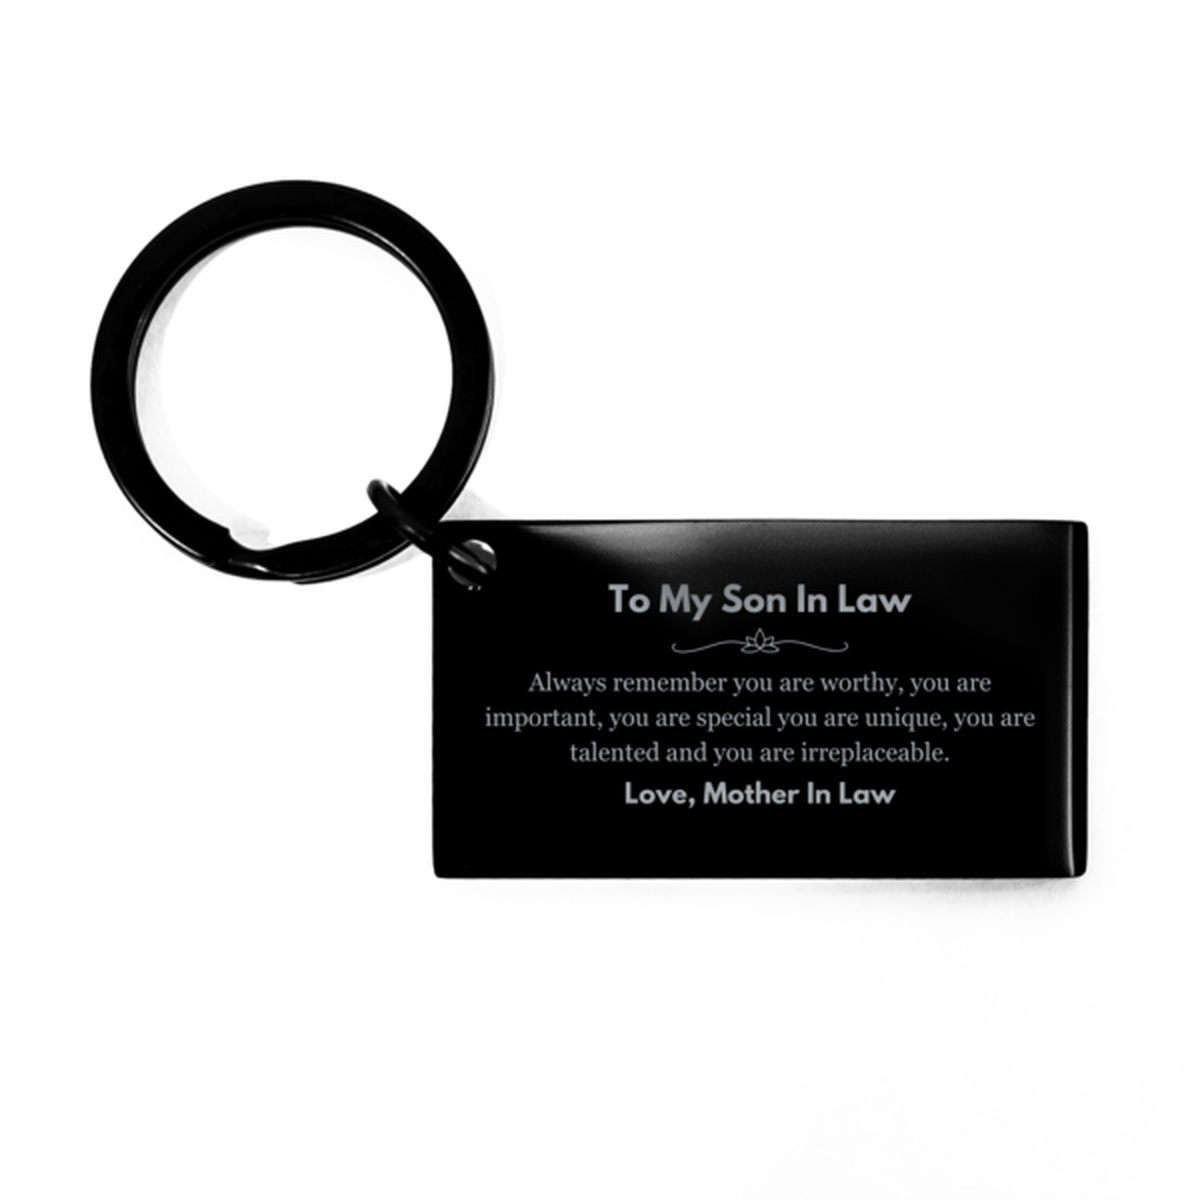 Son In Law Birthday Gifts from Mother In Law, Inspirational Keychain for Son In Law Christmas Graduation Gifts for Son In Law Always remember you are worthy, you are important. Love, Mother In Law